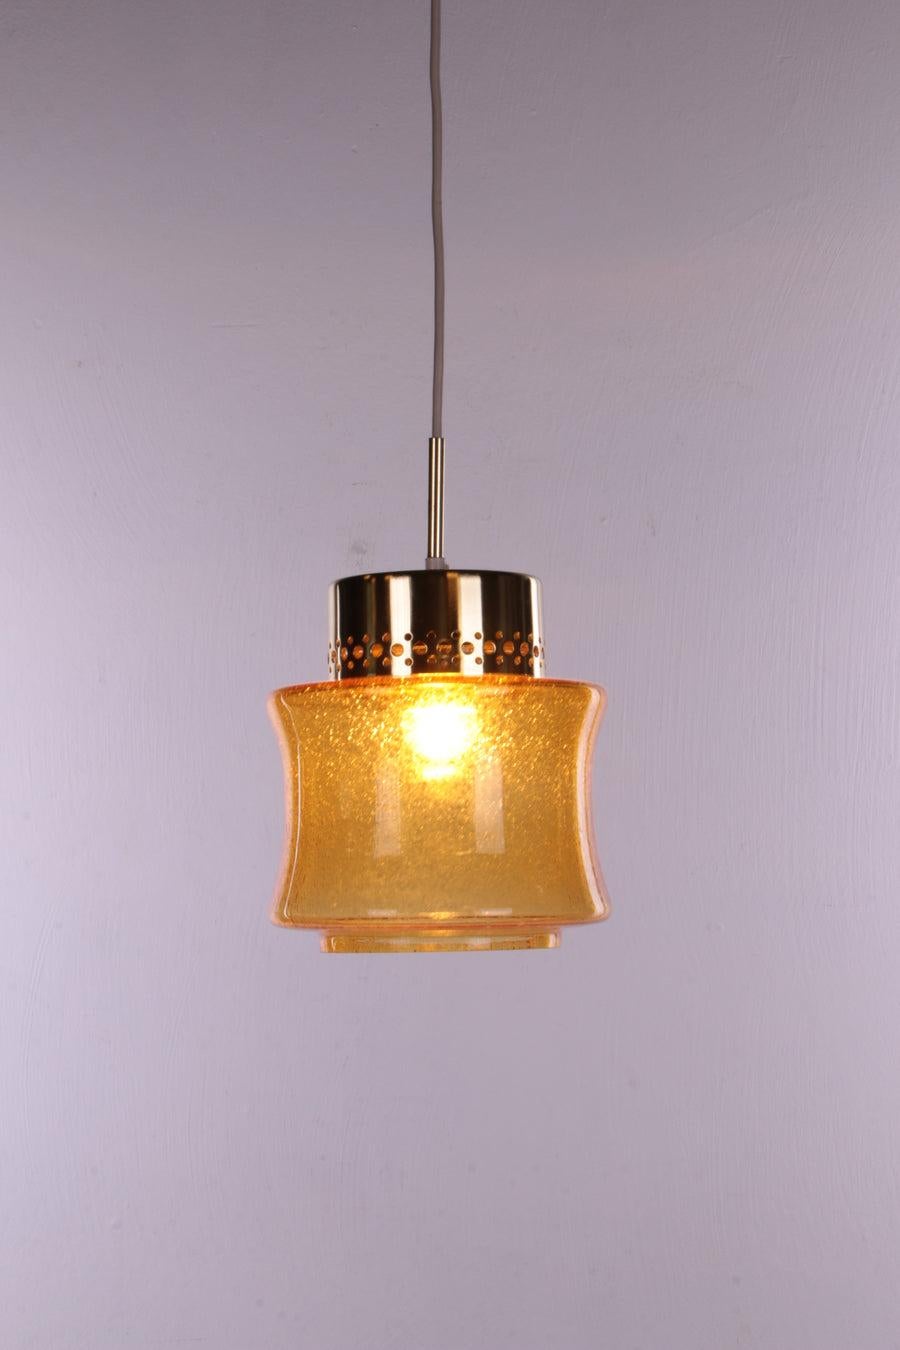 A set off 3 pice Vintage Hollywood Regency Pendant Lamp, 1960s Germany

These are very beautiful lamps with a beautiful yellow colored glass shade.

Mounted in a gold-colored holder with an E27 fitting.

These lamps were made by VEB narva